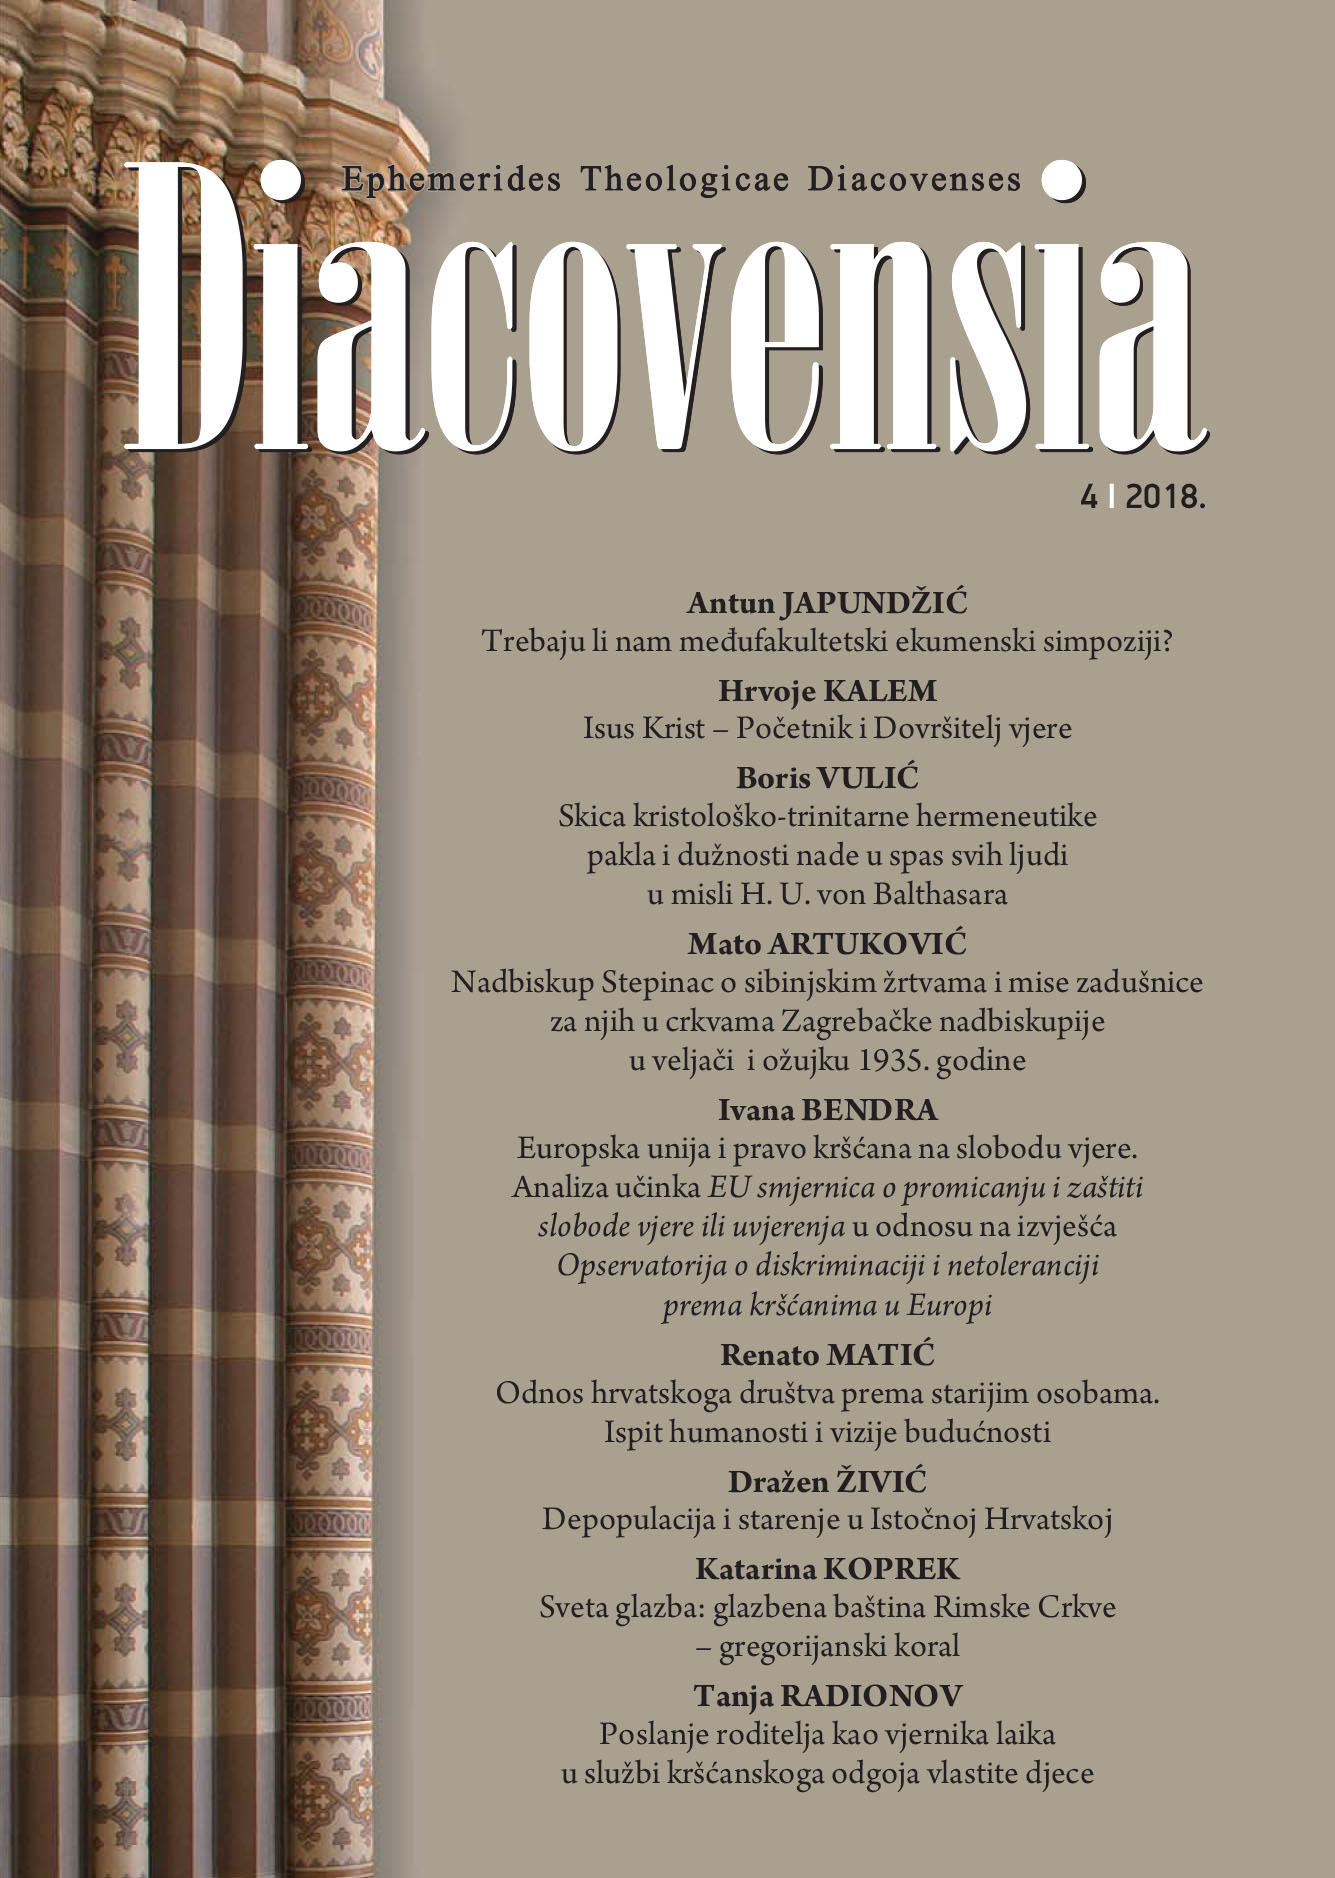 The Croatian society’s attitude towards older people Cover Image